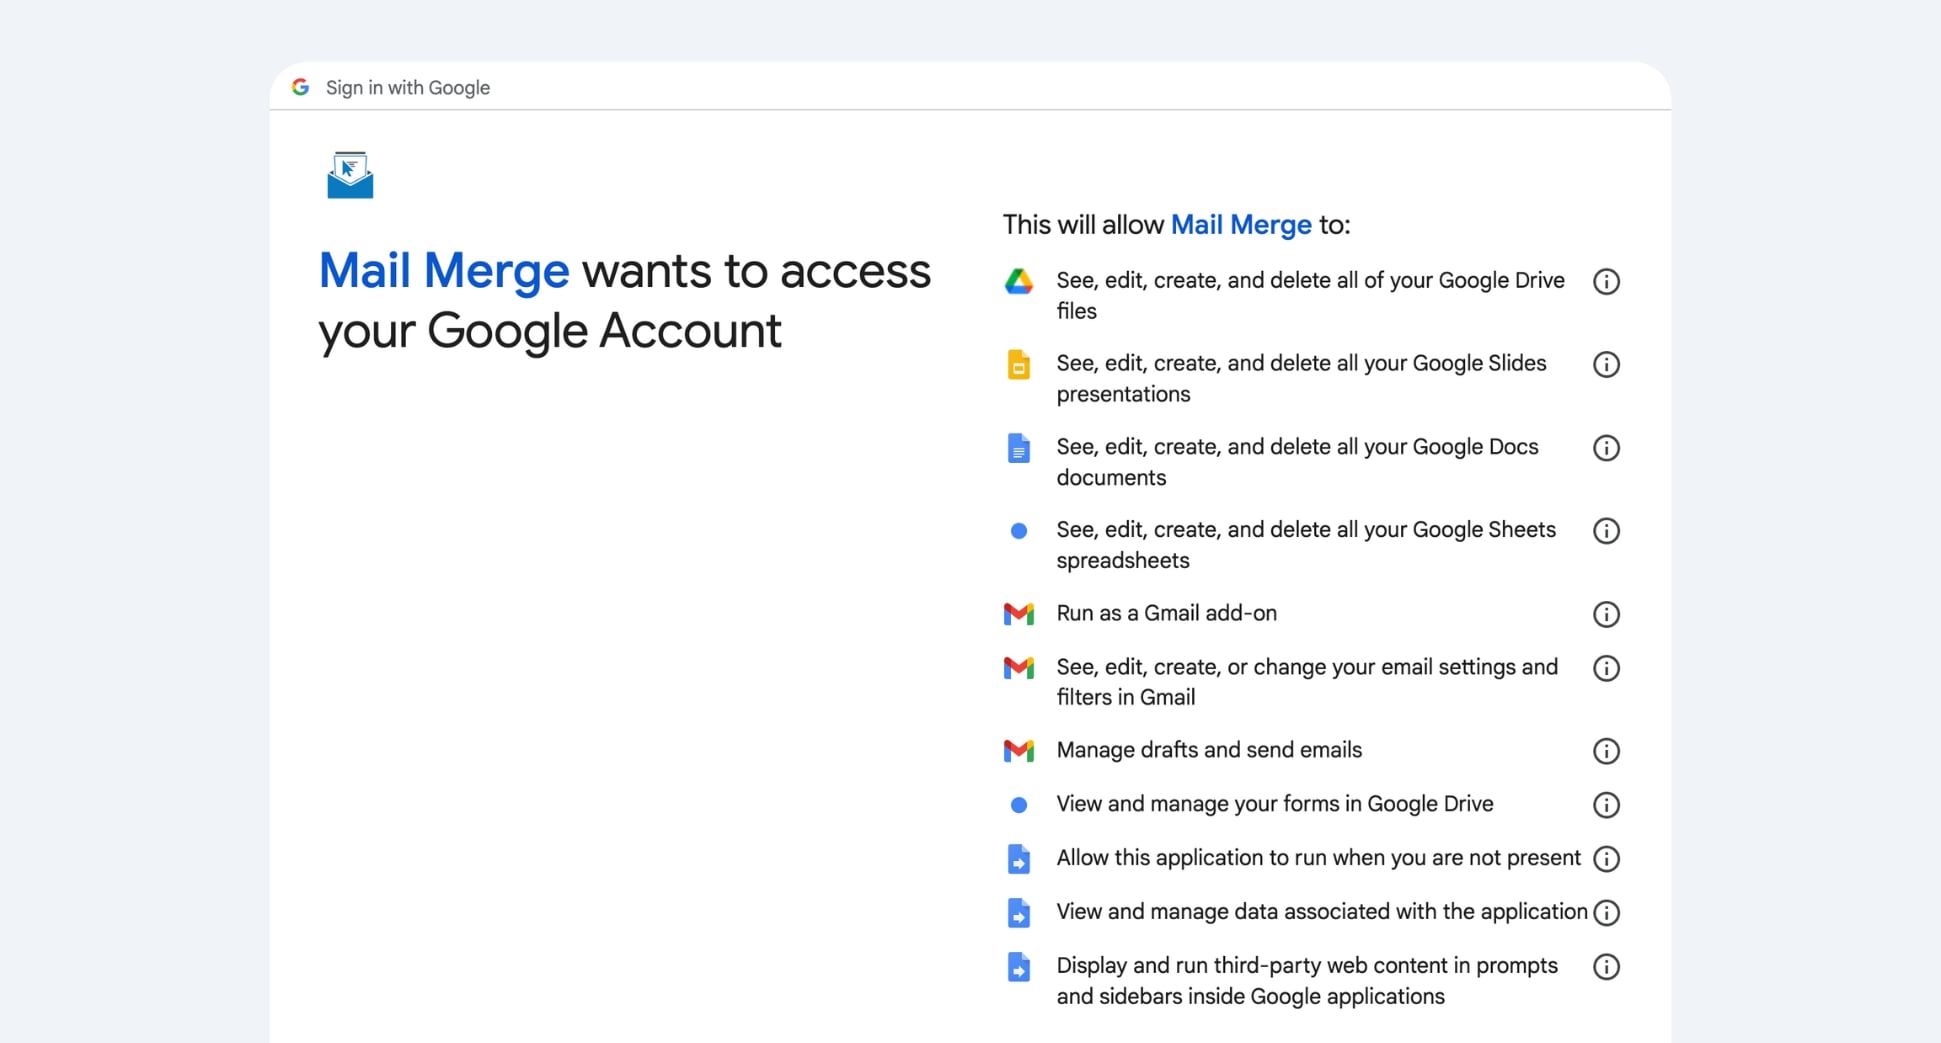 Mail Merge requires access to your Google Account